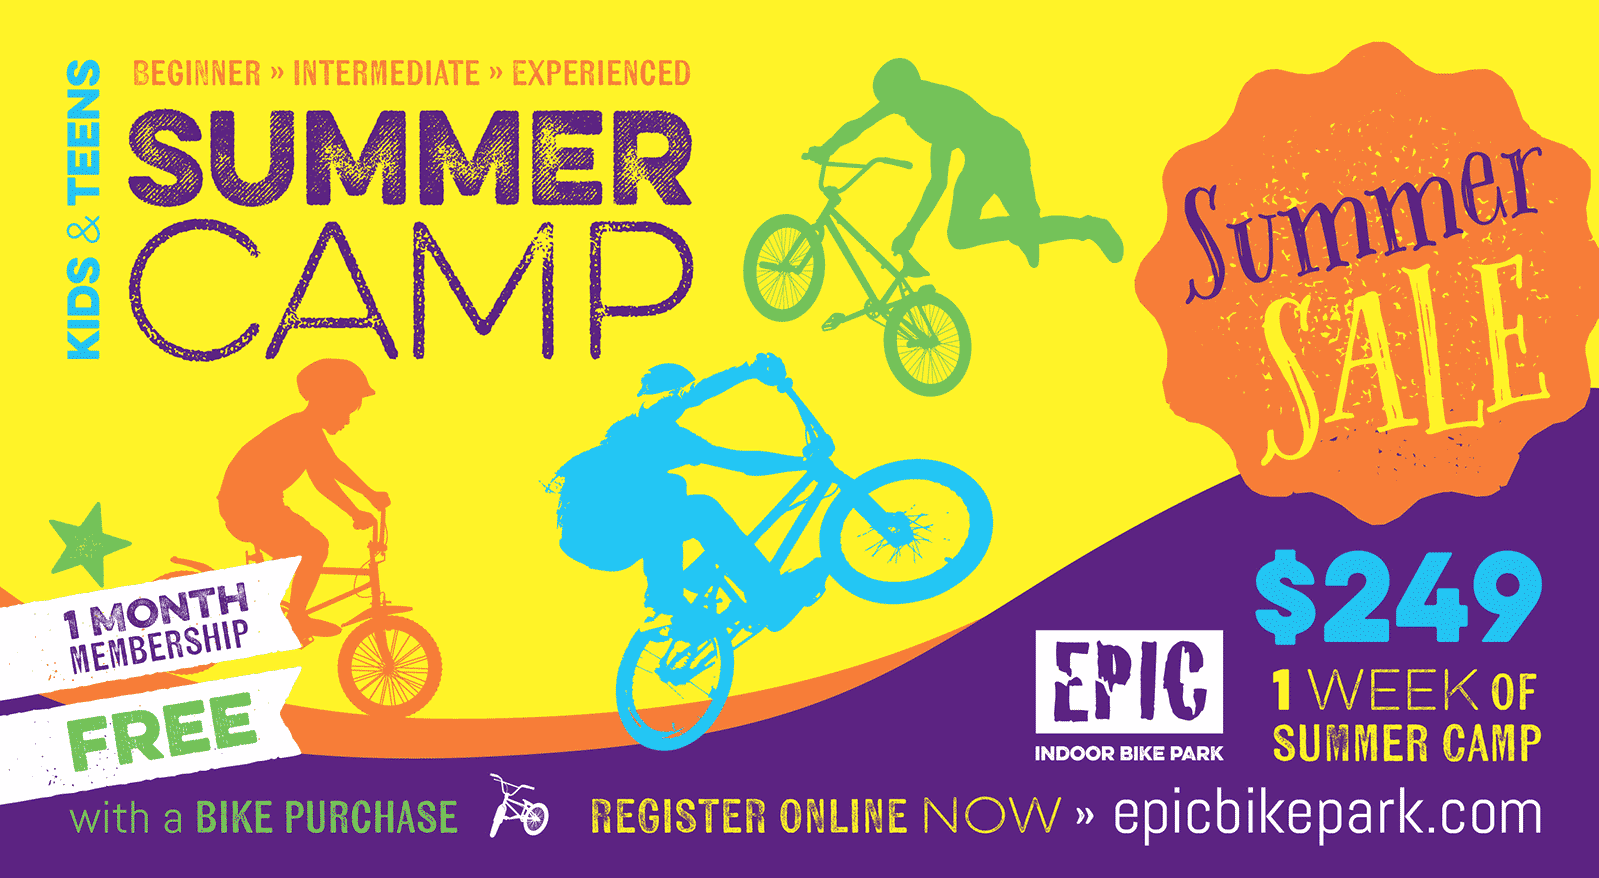 Ad camp. Camp advertising. Summer Camp advertisement. Summer Camp Advert. Advert Camping.